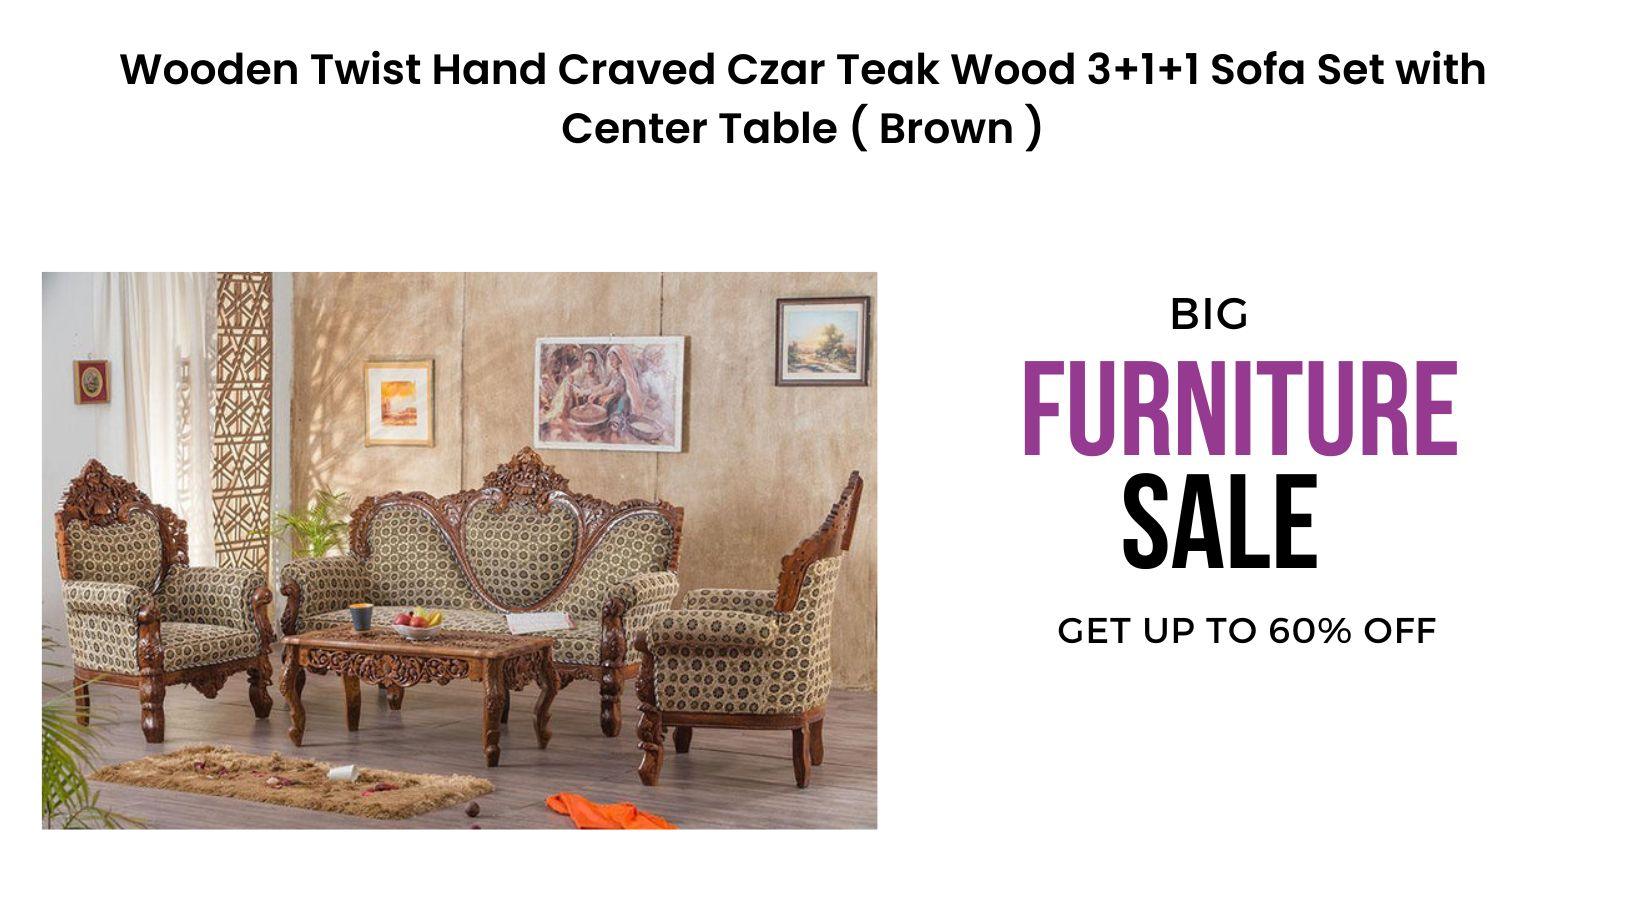 Make Your Living Room More Attractive with New Sofa Set Designs - Wooden Twist UAE